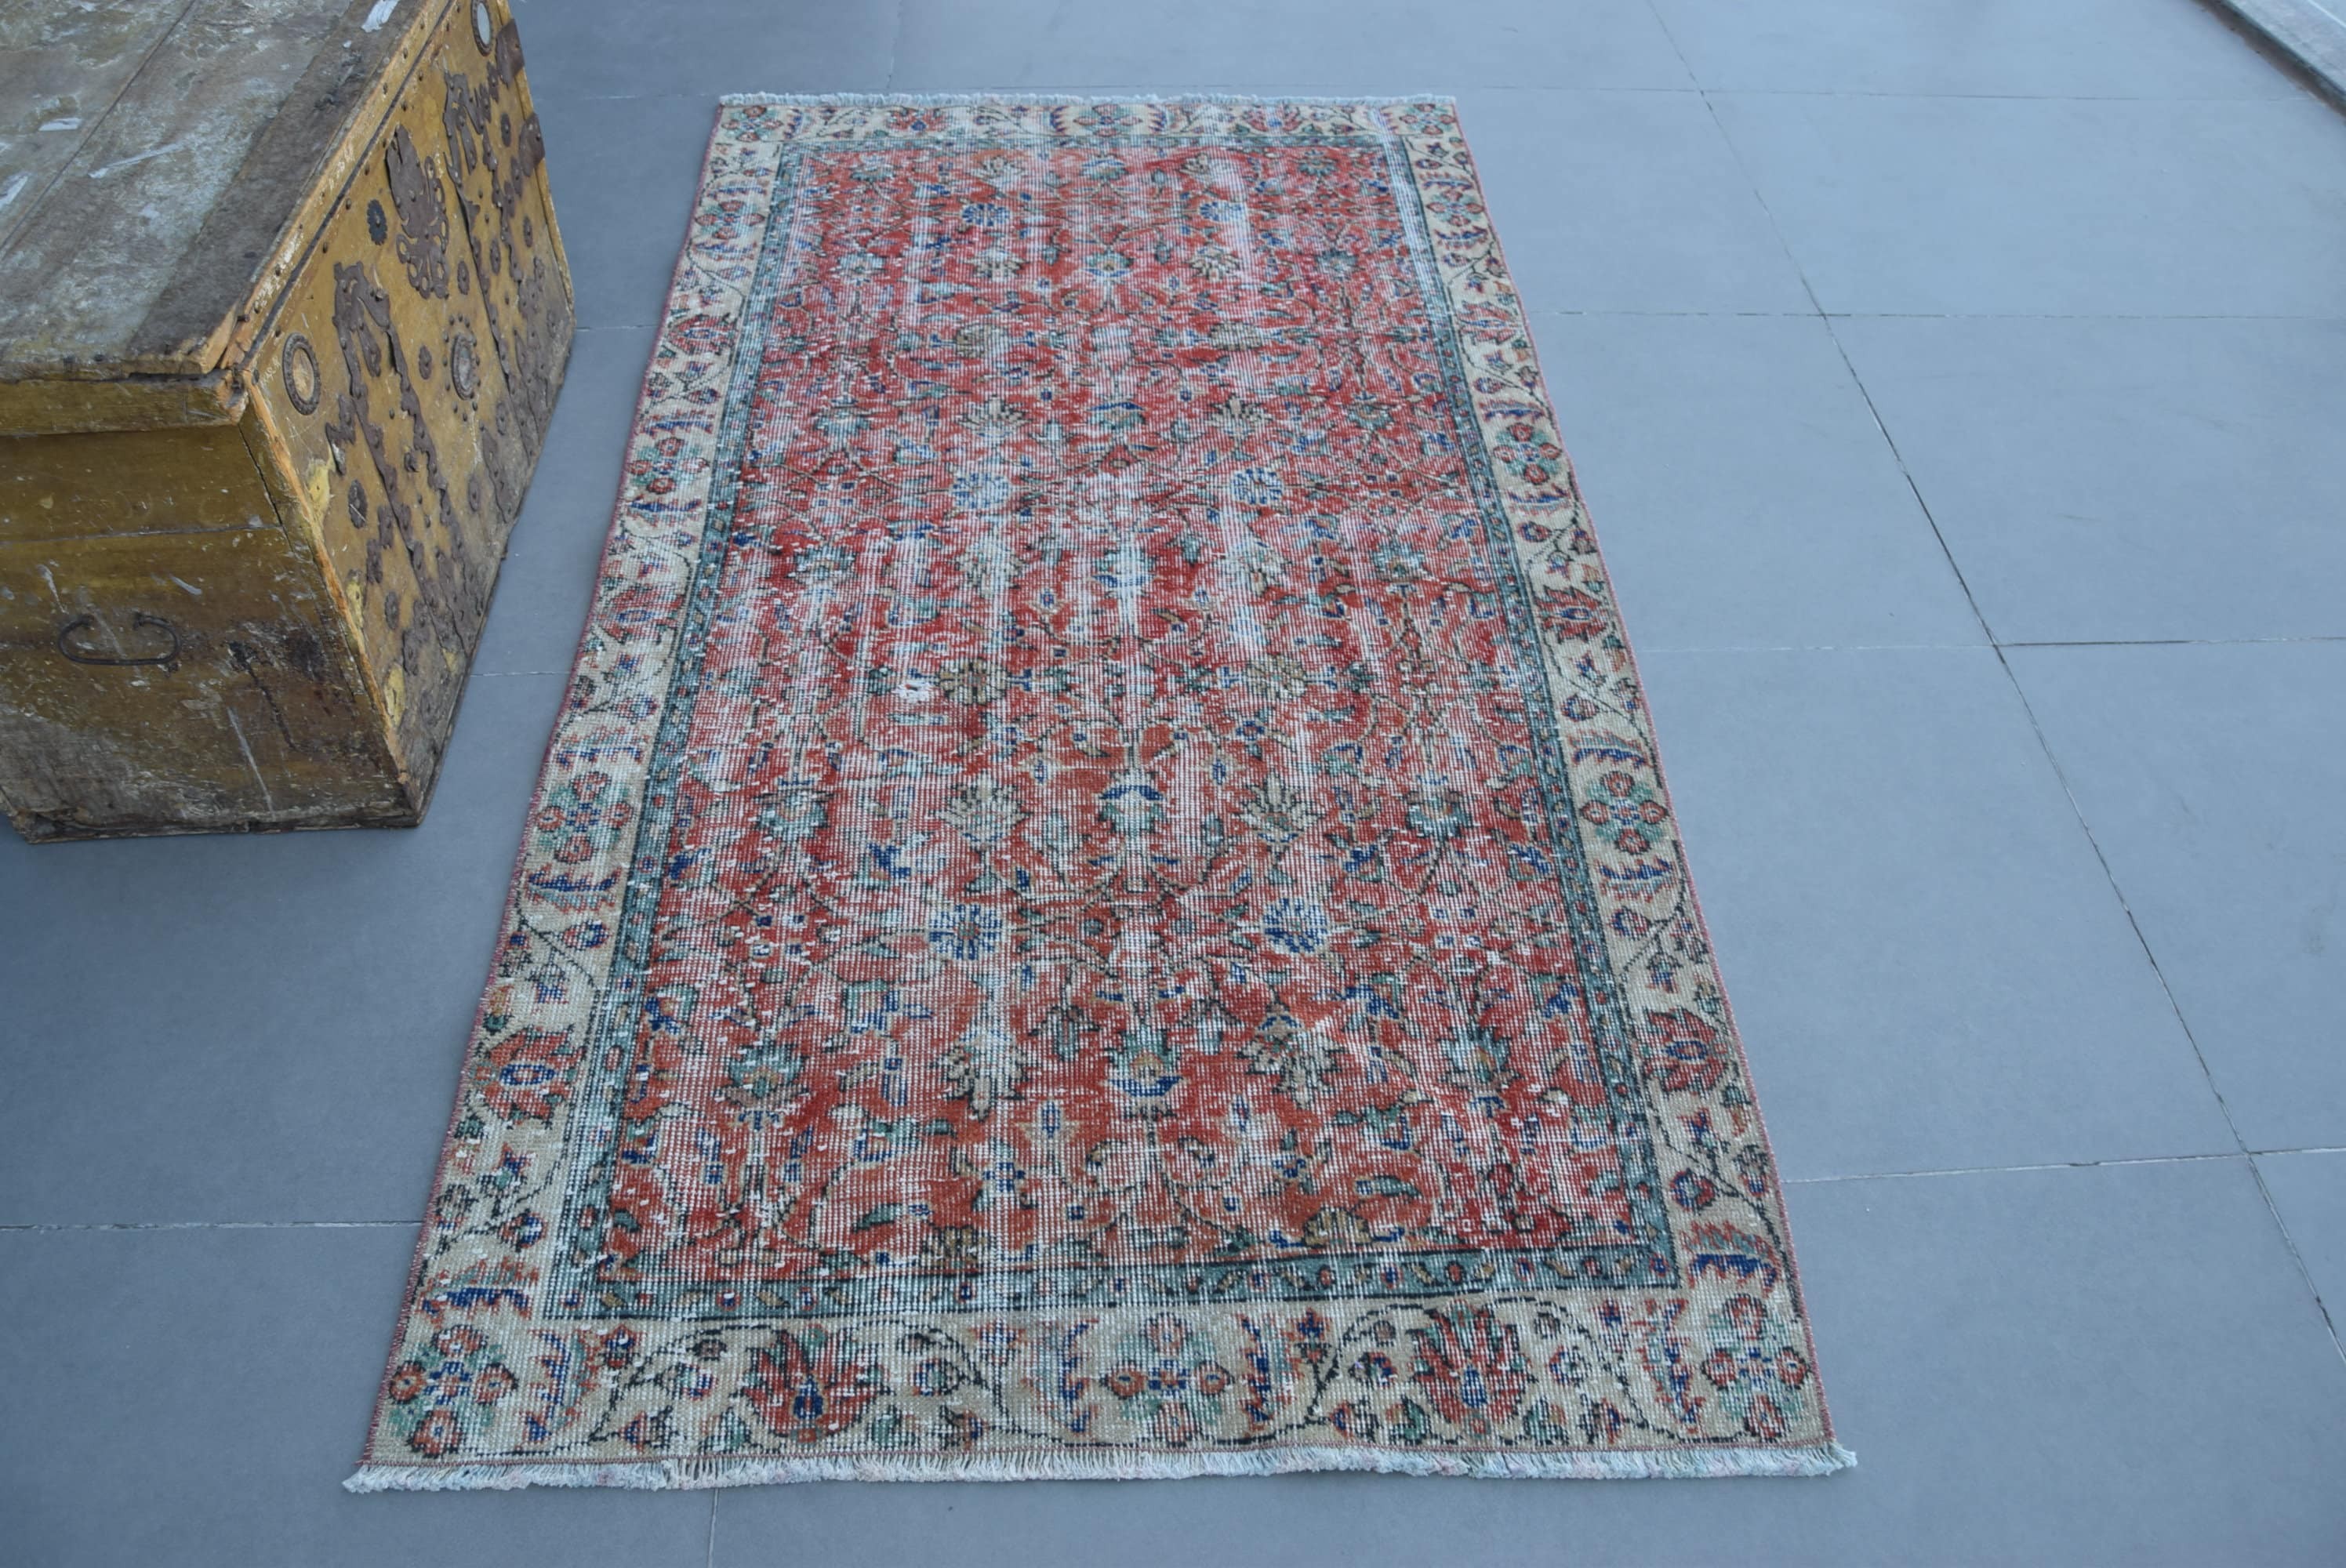 Bedroom Rugs, Turkish Rug, Oriental Rug, Antique Rug, Entry Rugs, Red Floor Rugs, Rugs for Kitchen, Vintage Rugs, 3.4x6.4 ft Accent Rugs